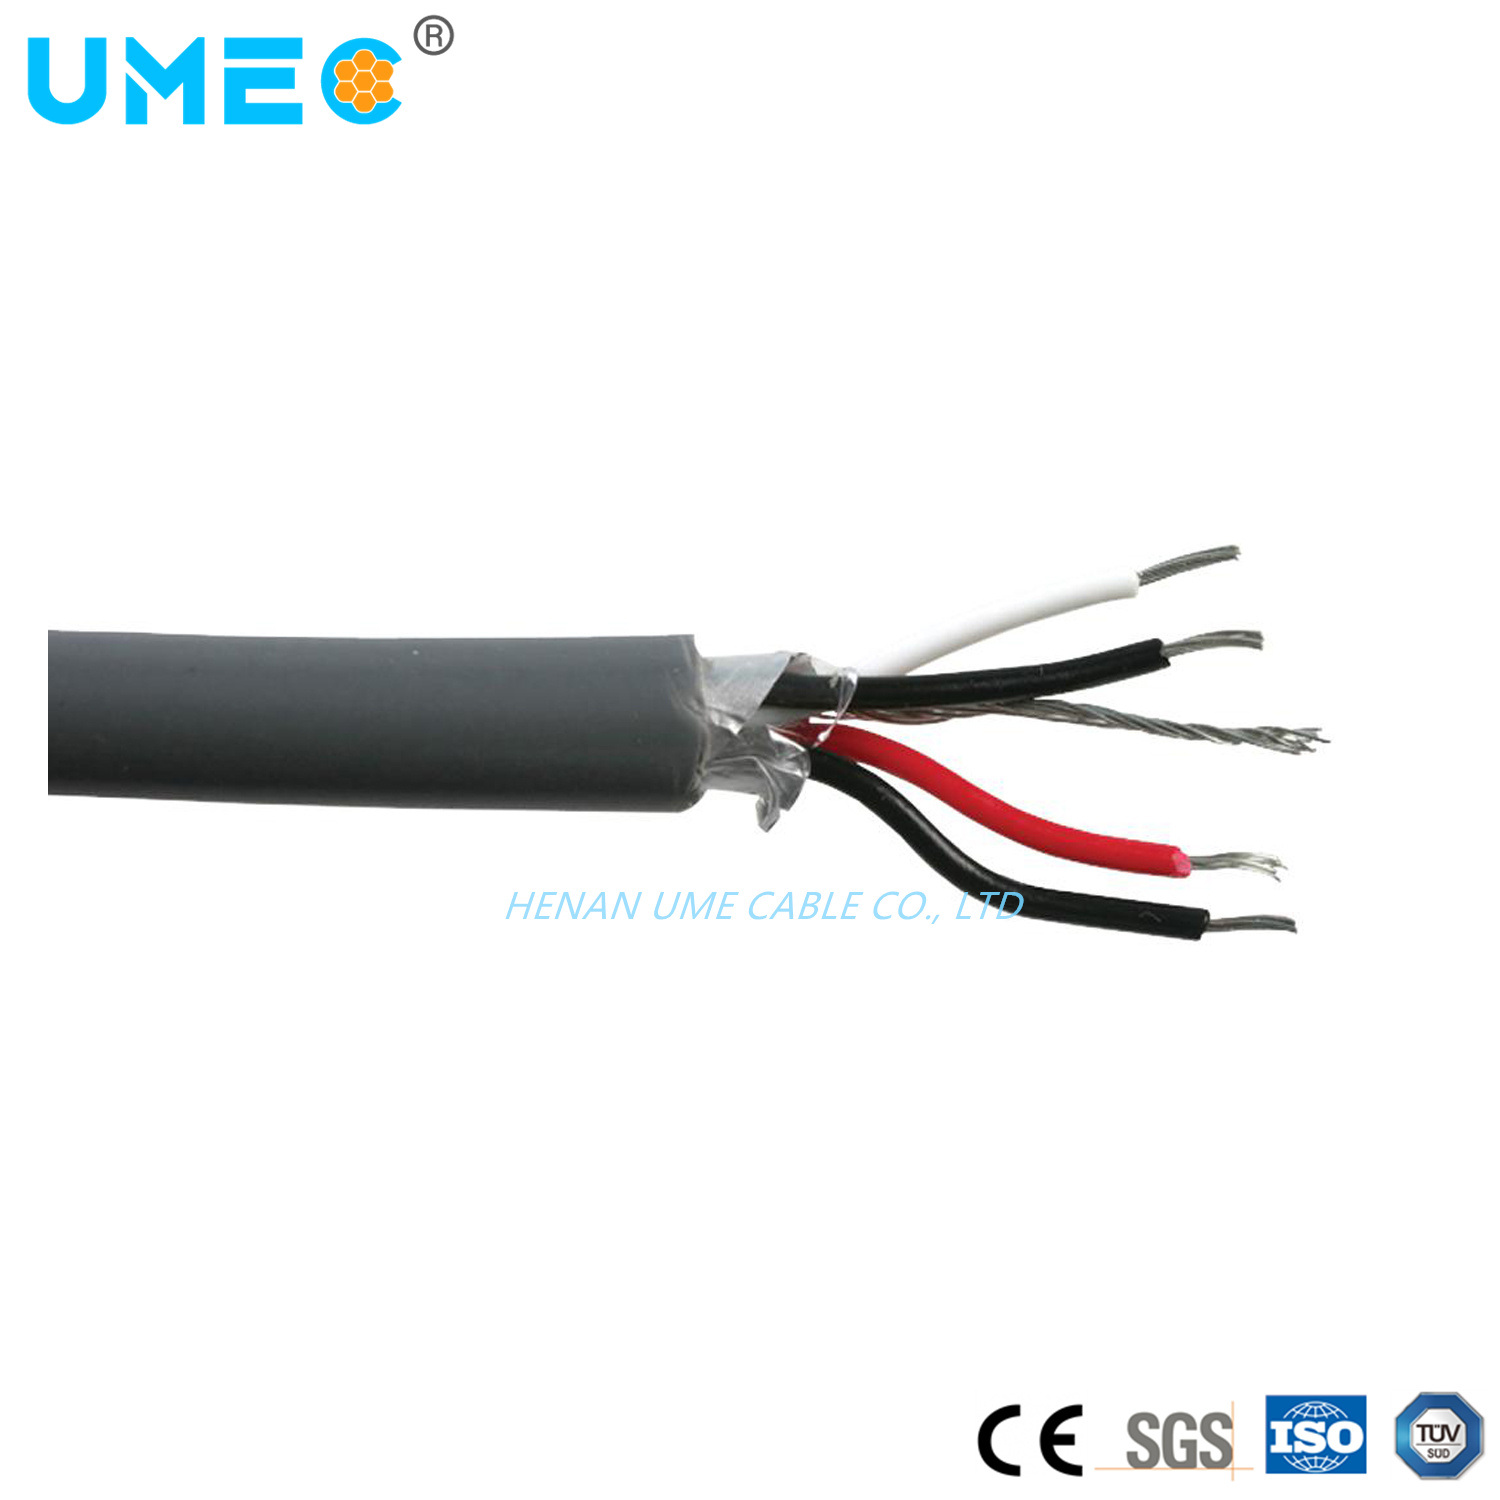 Network Cable Gray Cable Wire 300V 300/500V Shielded Armored Instrumentation and Thermoplastic Insulation Cable Computer Cable